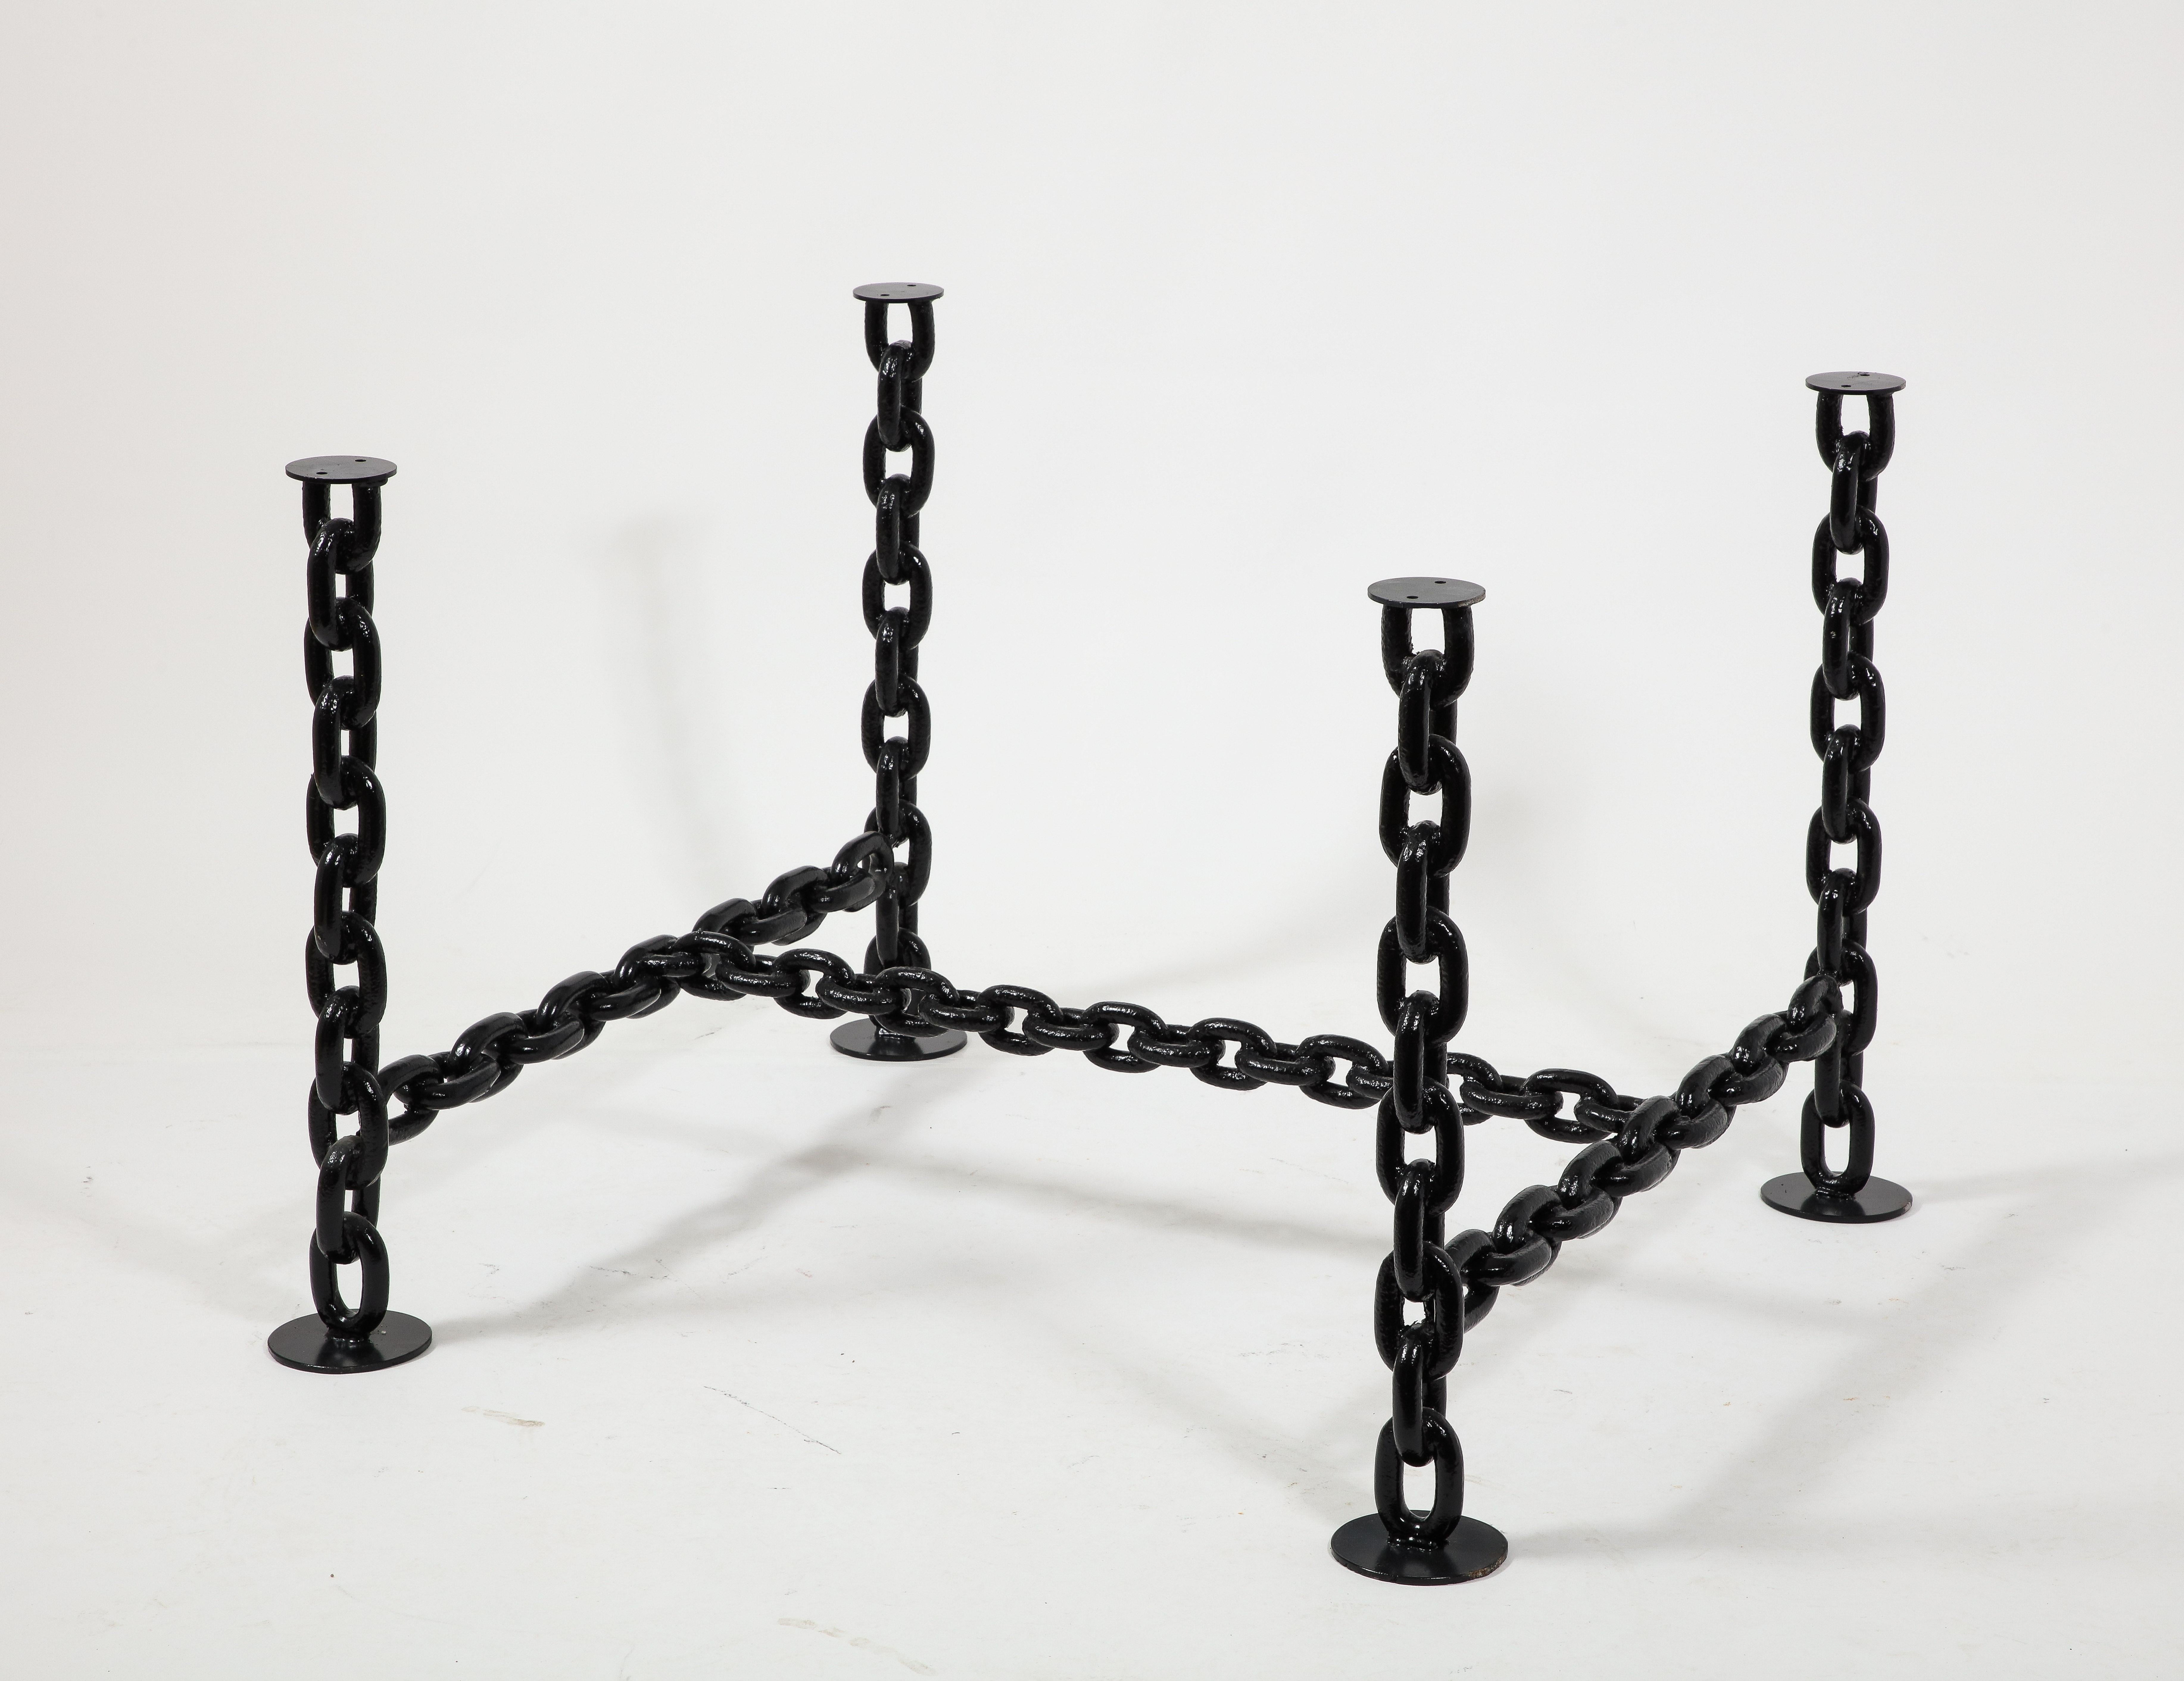 Unique brutalist massive dining or center table structure made of welded marine chains lacquered in black enamel.
In the style of Franz West.
France 1970's.